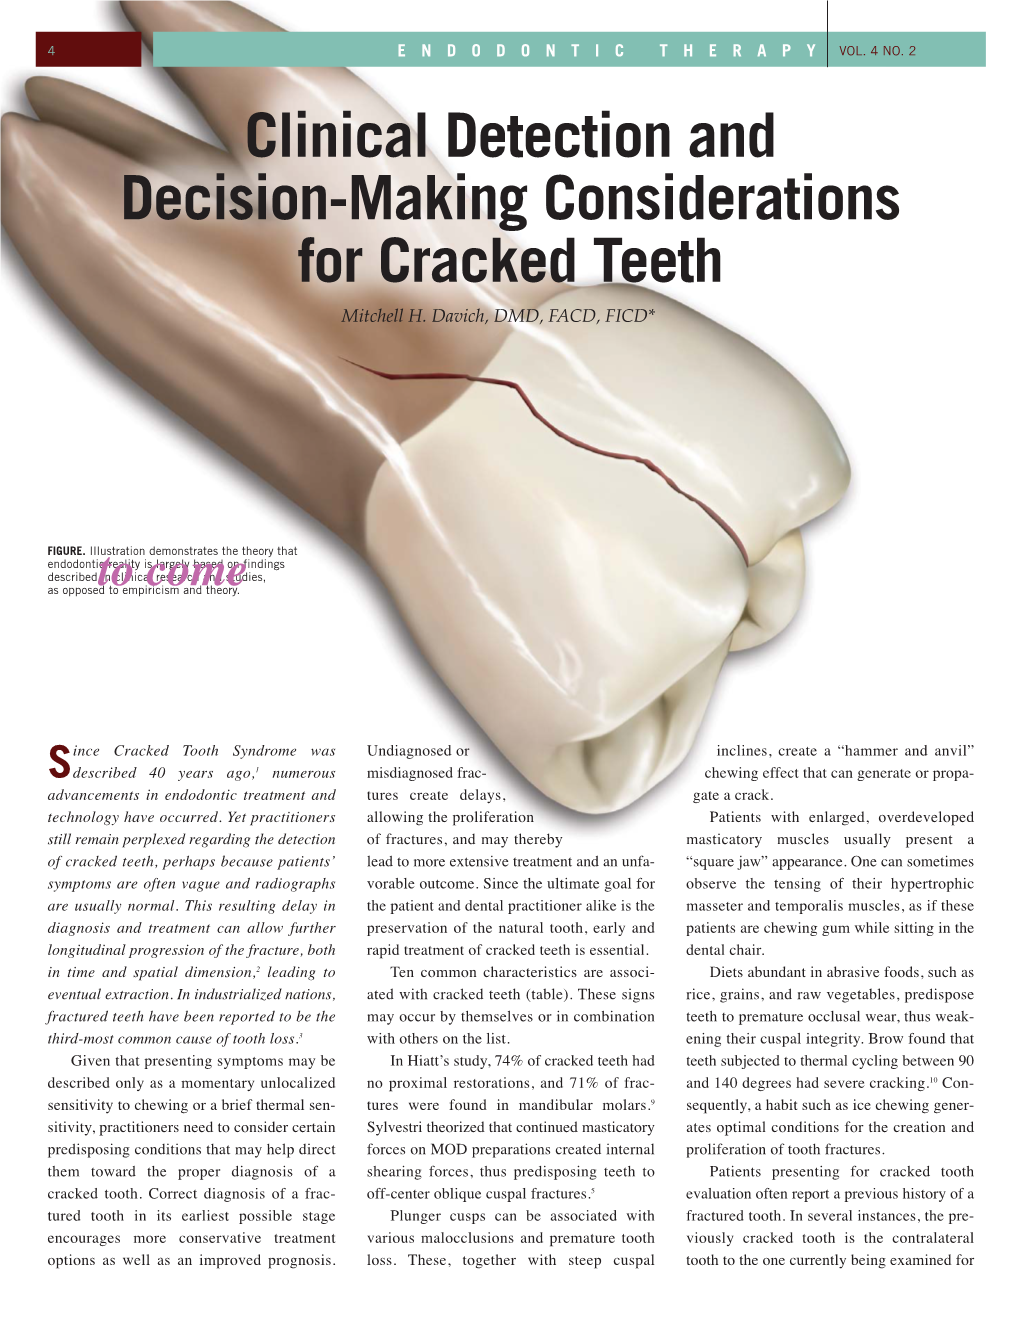 Clinical Detection and Decision-Making Considerations for Cracked Teeth Mitchell H